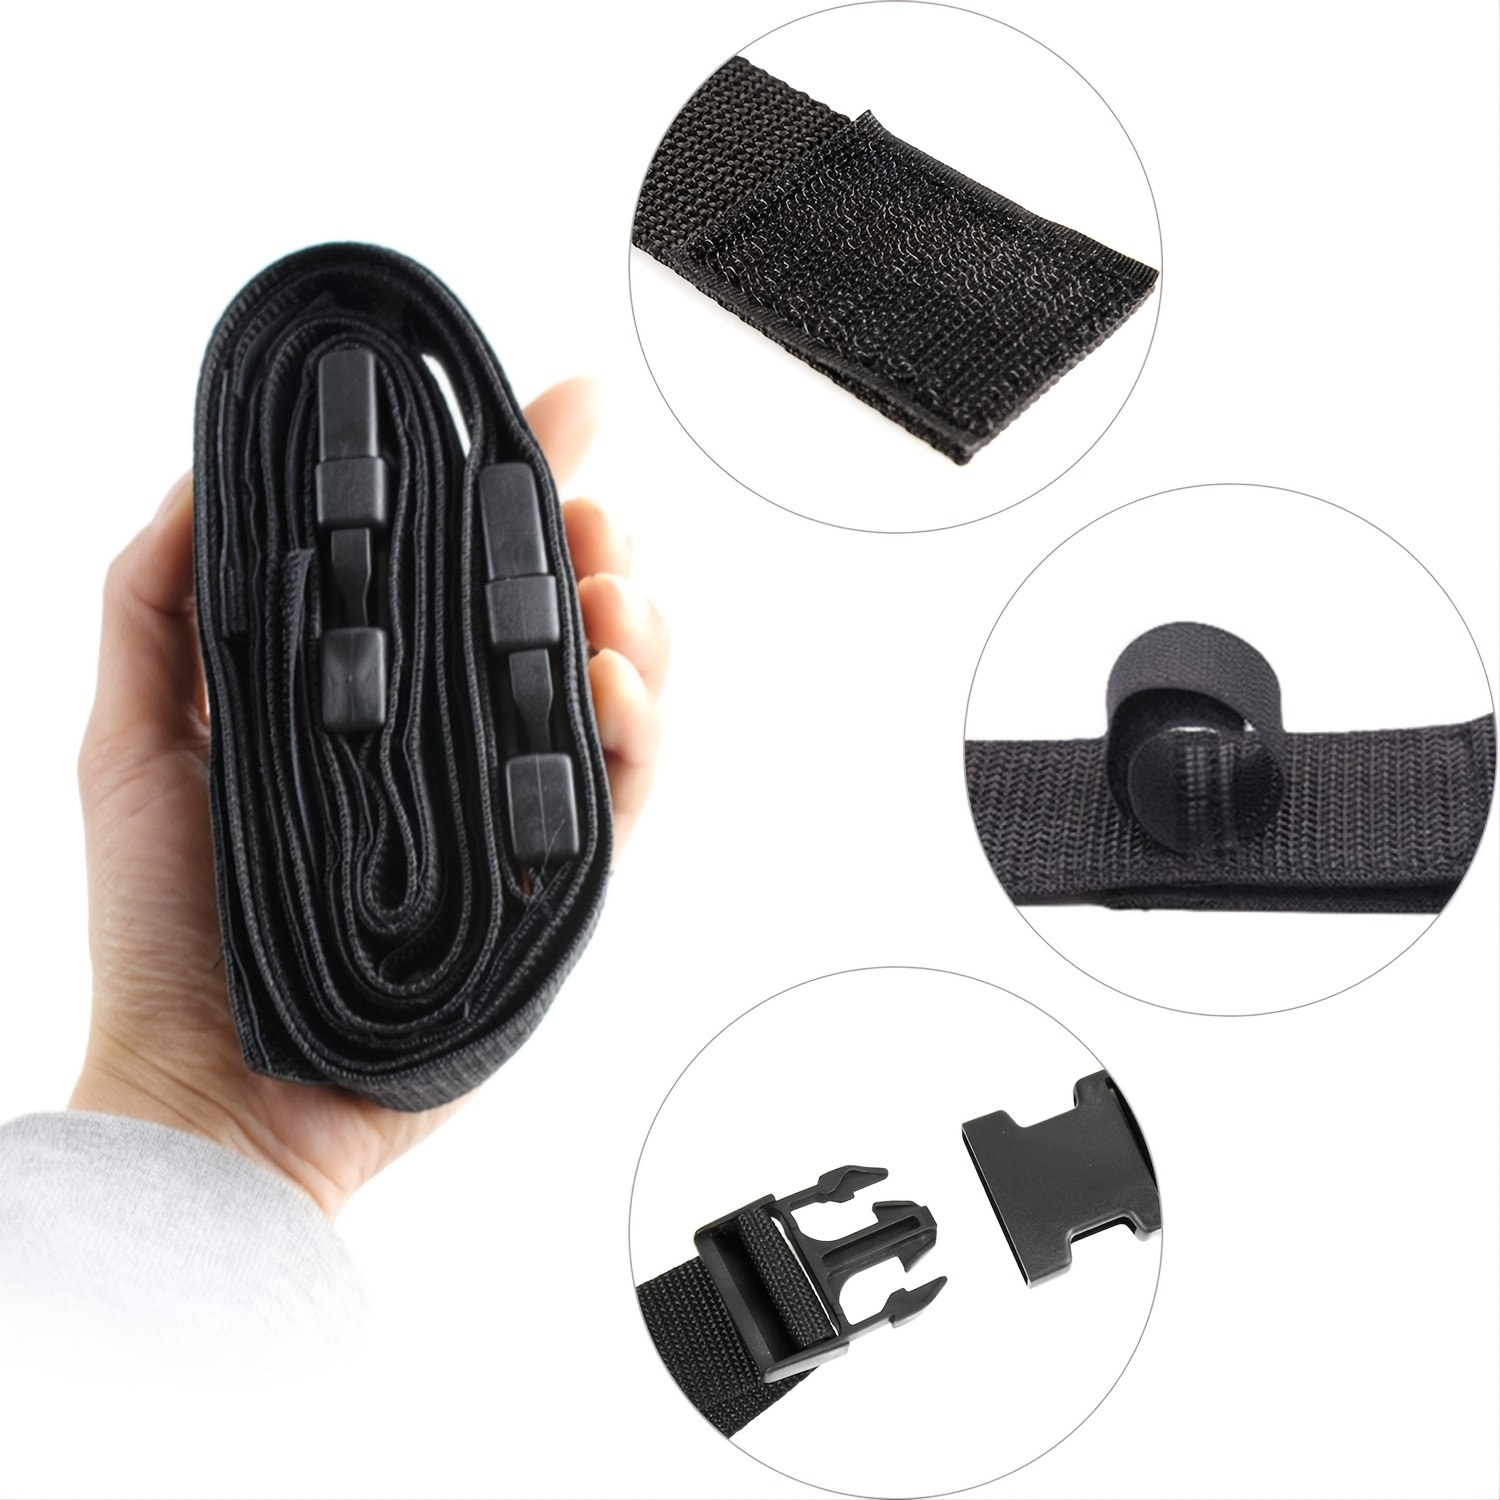 2x Fishing Rod Strapping Fishing Gadget Fishing Vehicle Rod Carrier Rod  Holder For Car Belt Strap Tie Fishing Tackles